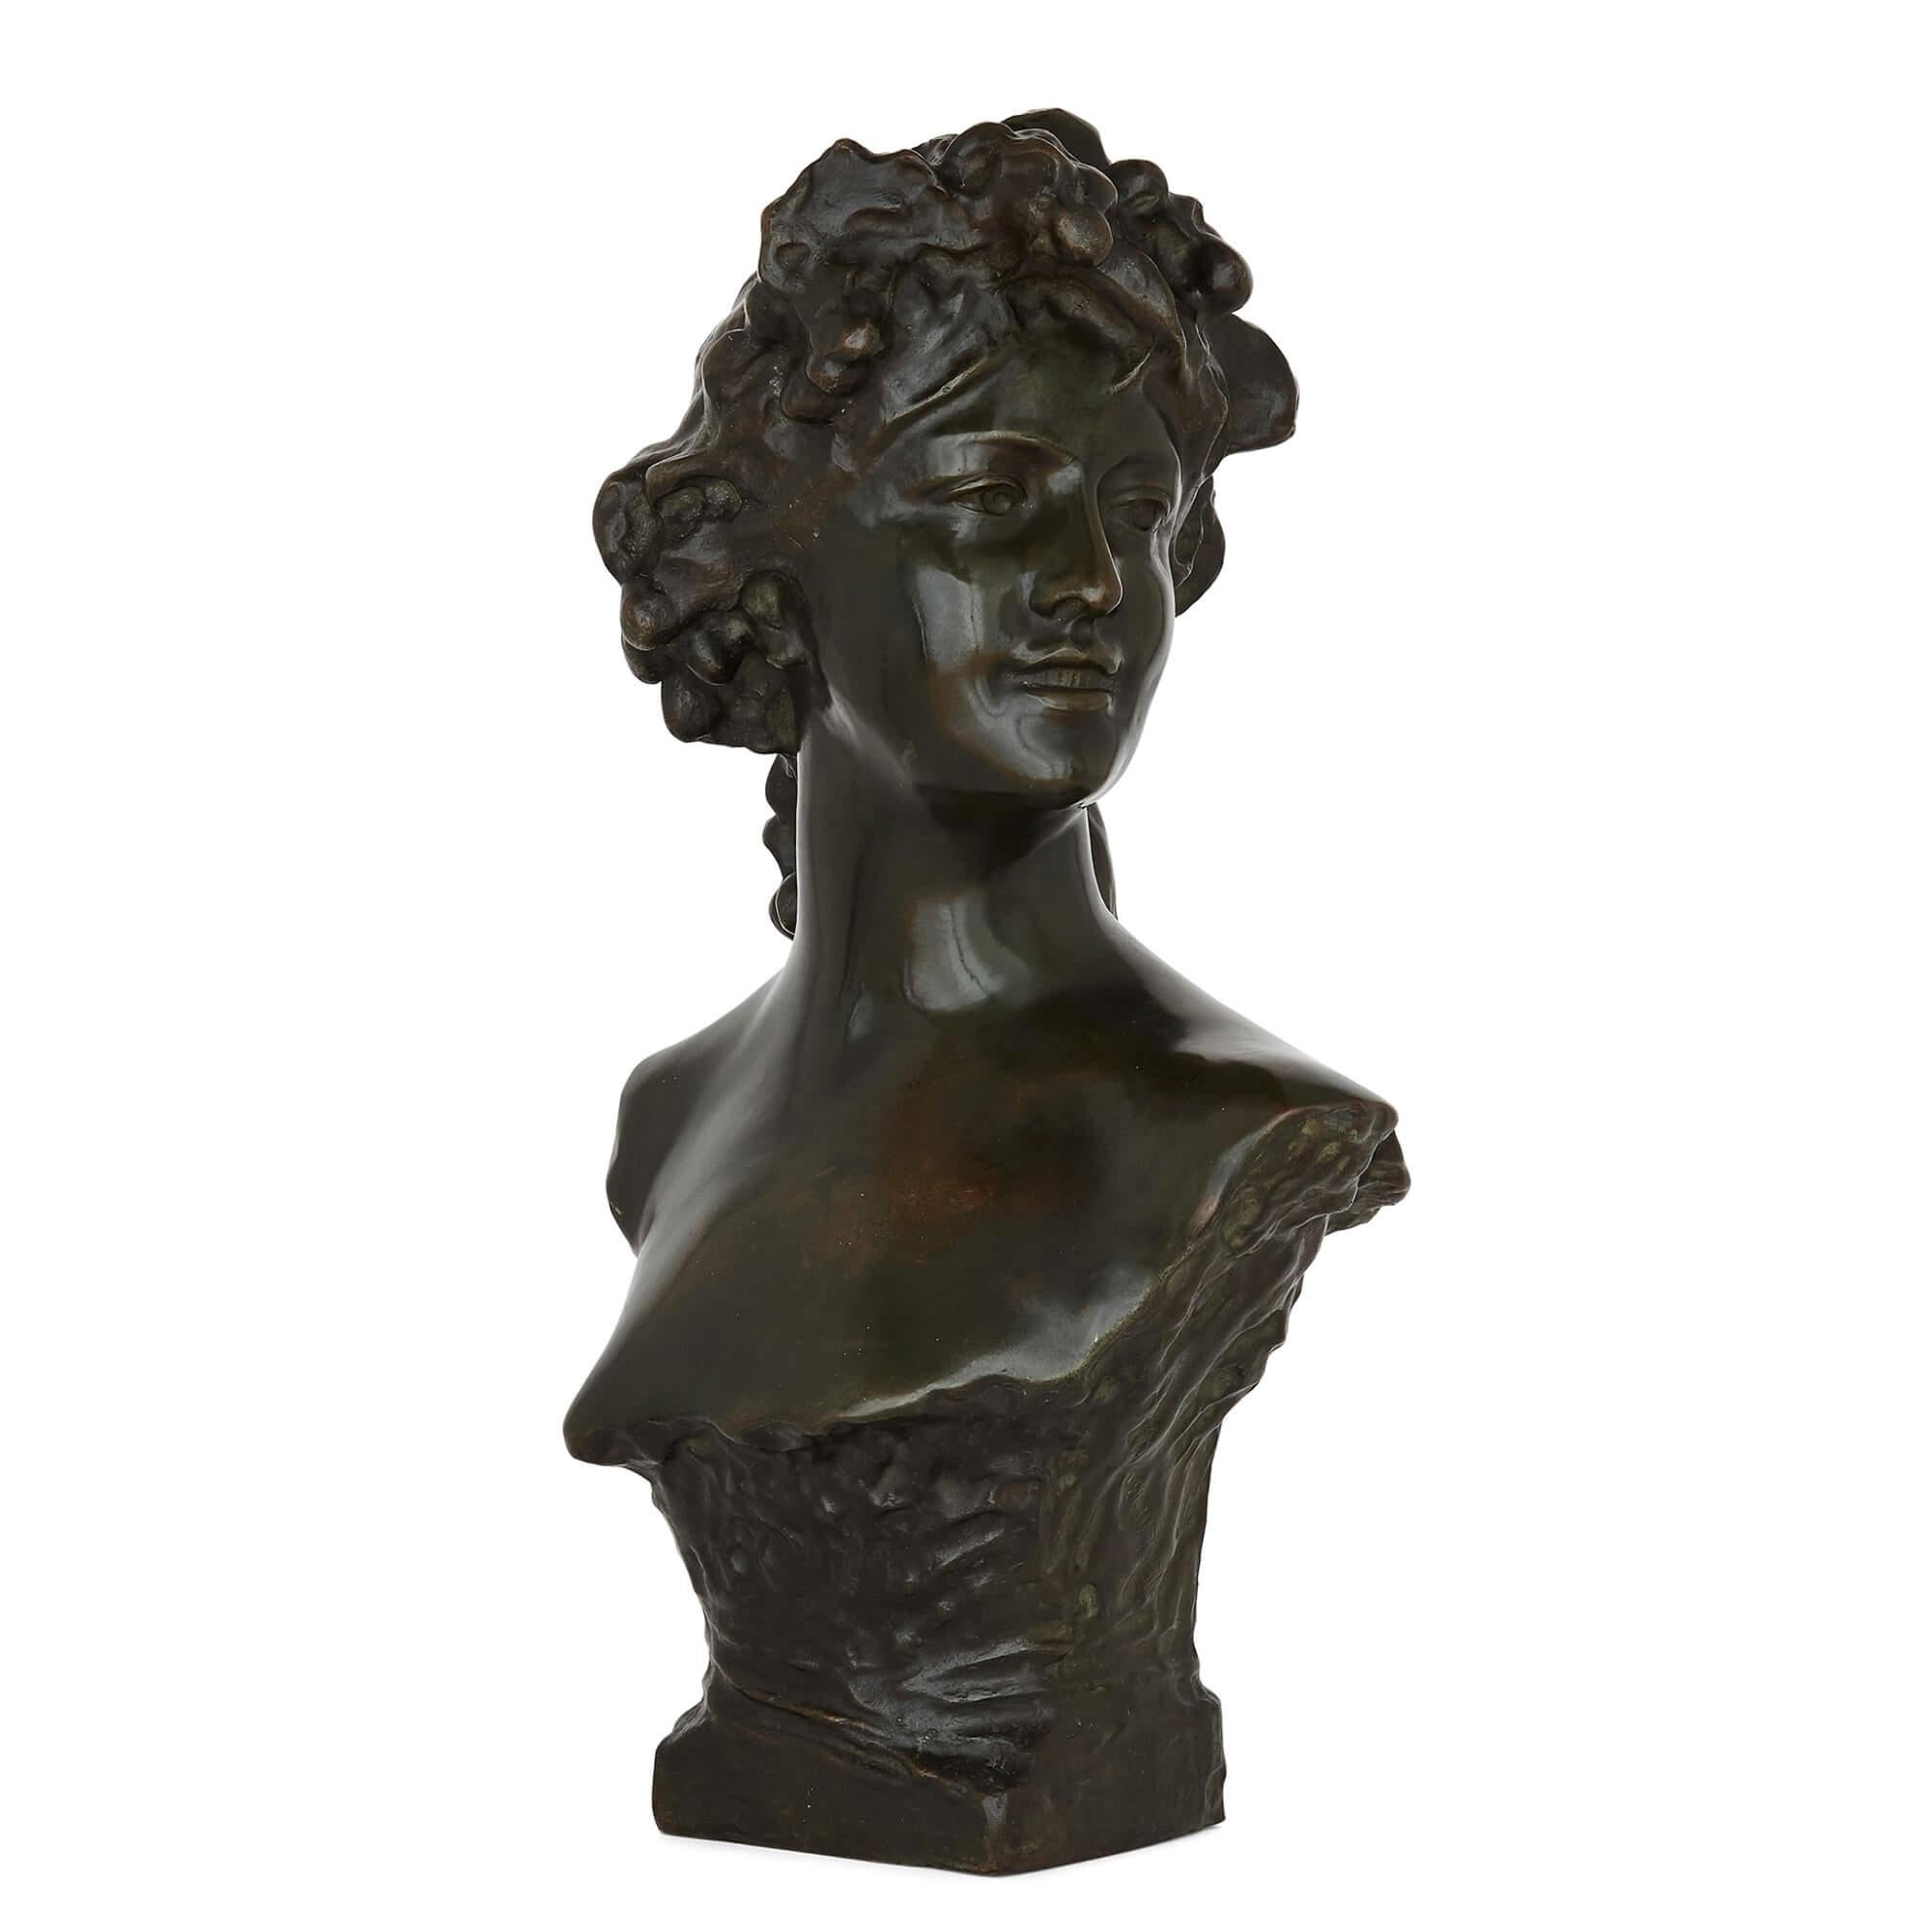 Belgian patinated bronze bust by Lambeaux
Belgian, late 19th Century
Measures: Height 63cm, width 35cm, depth 15cm

This charming patinated bronze bust by the Belgian sculptor Lambreaux depicts a young woman. The sitter, her head turned to her